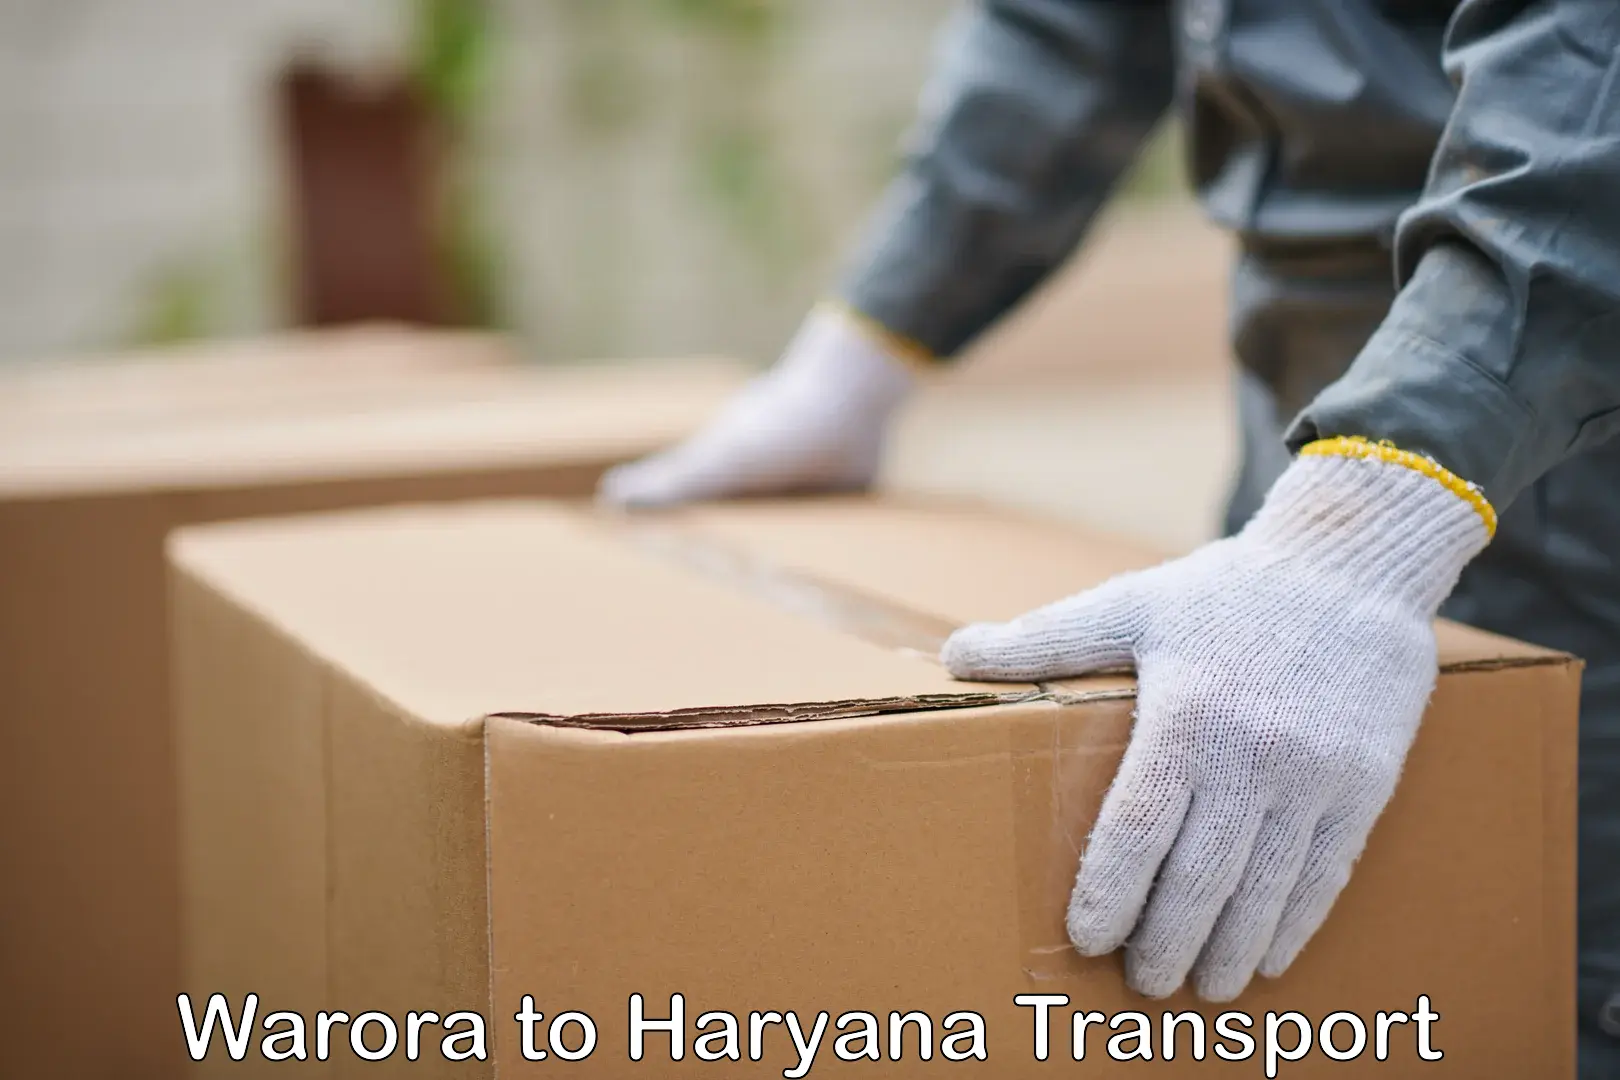 Transport shared services in Warora to Haryana